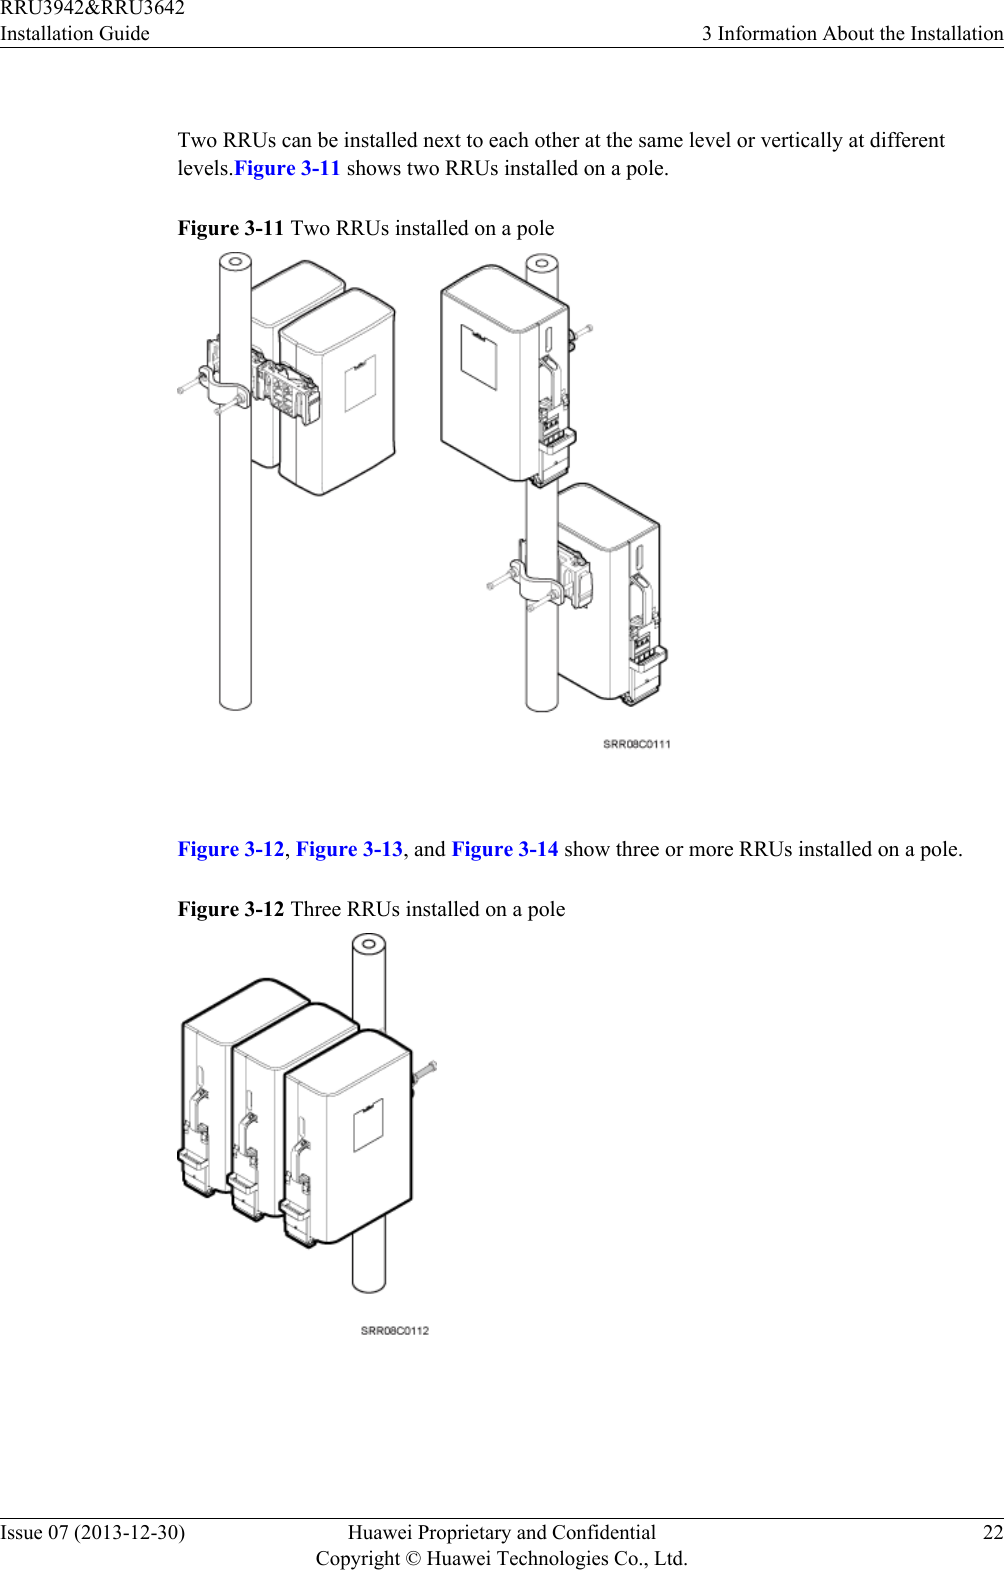  Two RRUs can be installed next to each other at the same level or vertically at differentlevels.Figure 3-11 shows two RRUs installed on a pole.Figure 3-11 Two RRUs installed on a pole Figure 3-12, Figure 3-13, and Figure 3-14 show three or more RRUs installed on a pole.Figure 3-12 Three RRUs installed on a pole RRU3942&amp;RRU3642Installation Guide 3 Information About the InstallationIssue 07 (2013-12-30) Huawei Proprietary and ConfidentialCopyright © Huawei Technologies Co., Ltd.22